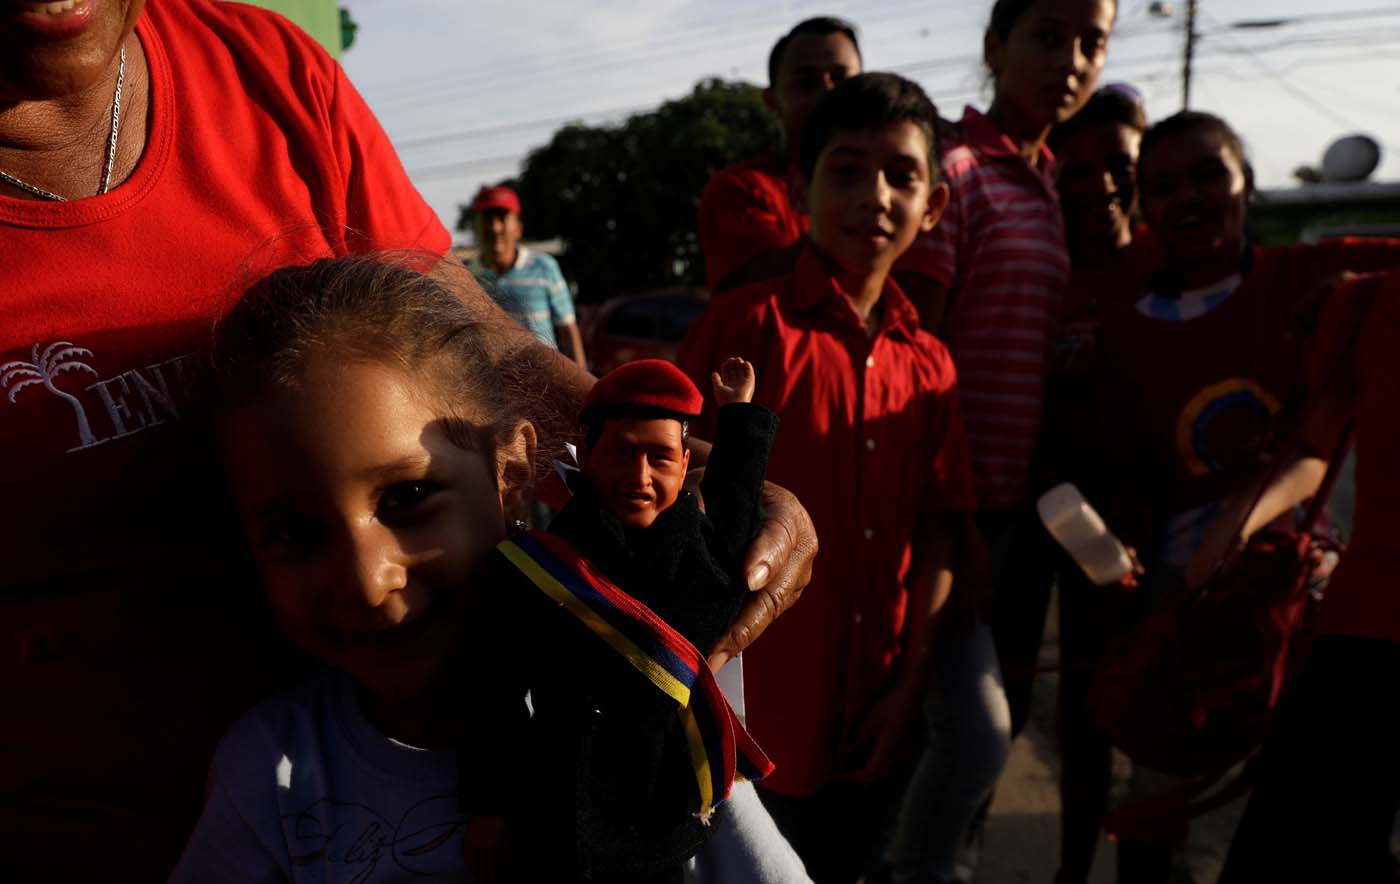 A supporter of the ruling Socialist Party's candidate for Barinas state Argenis Chavez, holds a doll of his brother, the late President of Venezuela Hugo Chavez, during a campaign event on the outskirts of Barinas, Venezuela, October 2, 2017. Picture taken on October 2, 2017. REUTERS/Ricardo Moraes